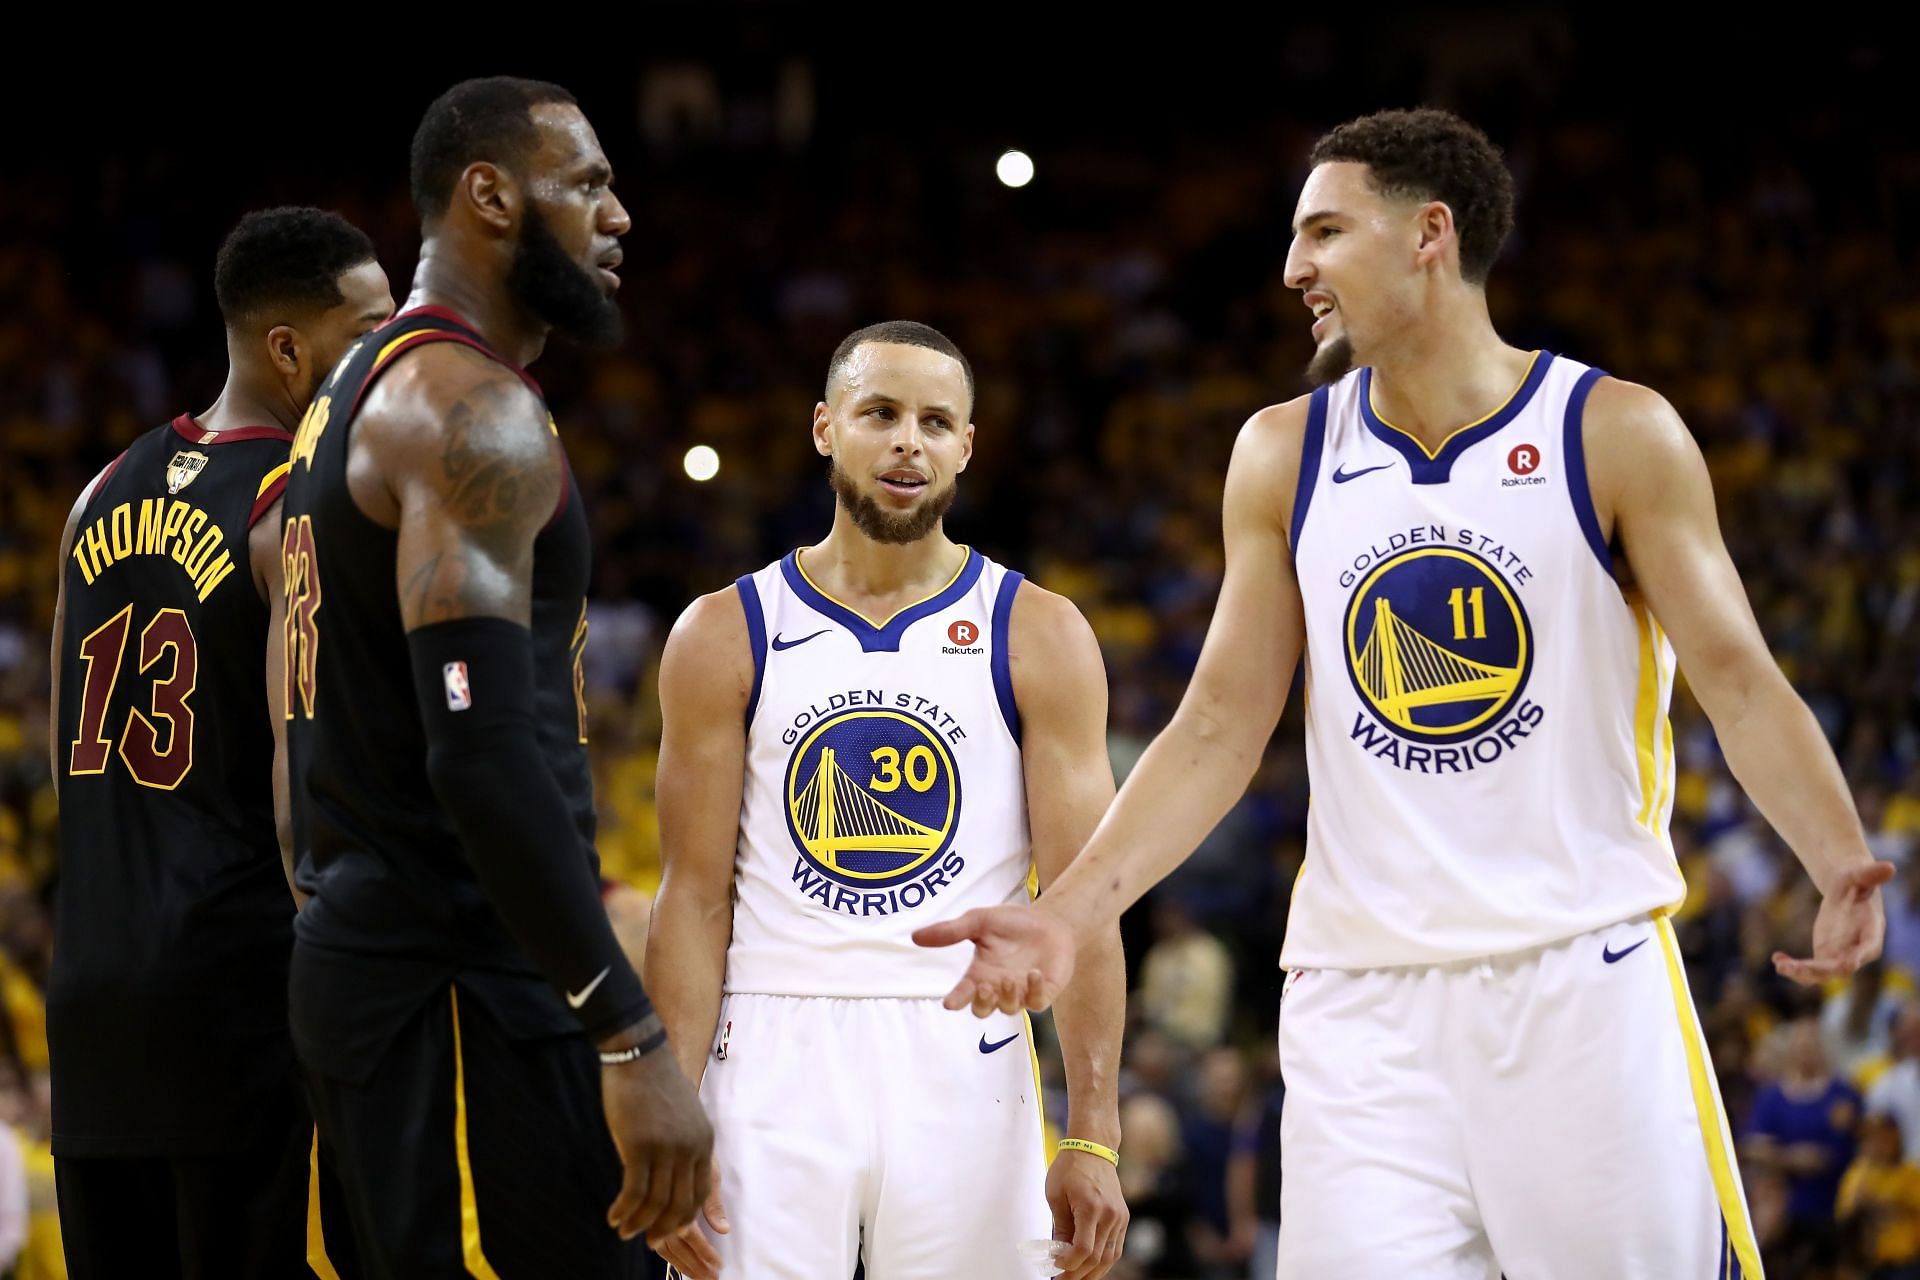 Stephen Curry #30 and Klay Thompson #11 of the Golden State Warriors exchange words with LeBron James #23 of the Cleveland Cavaliers